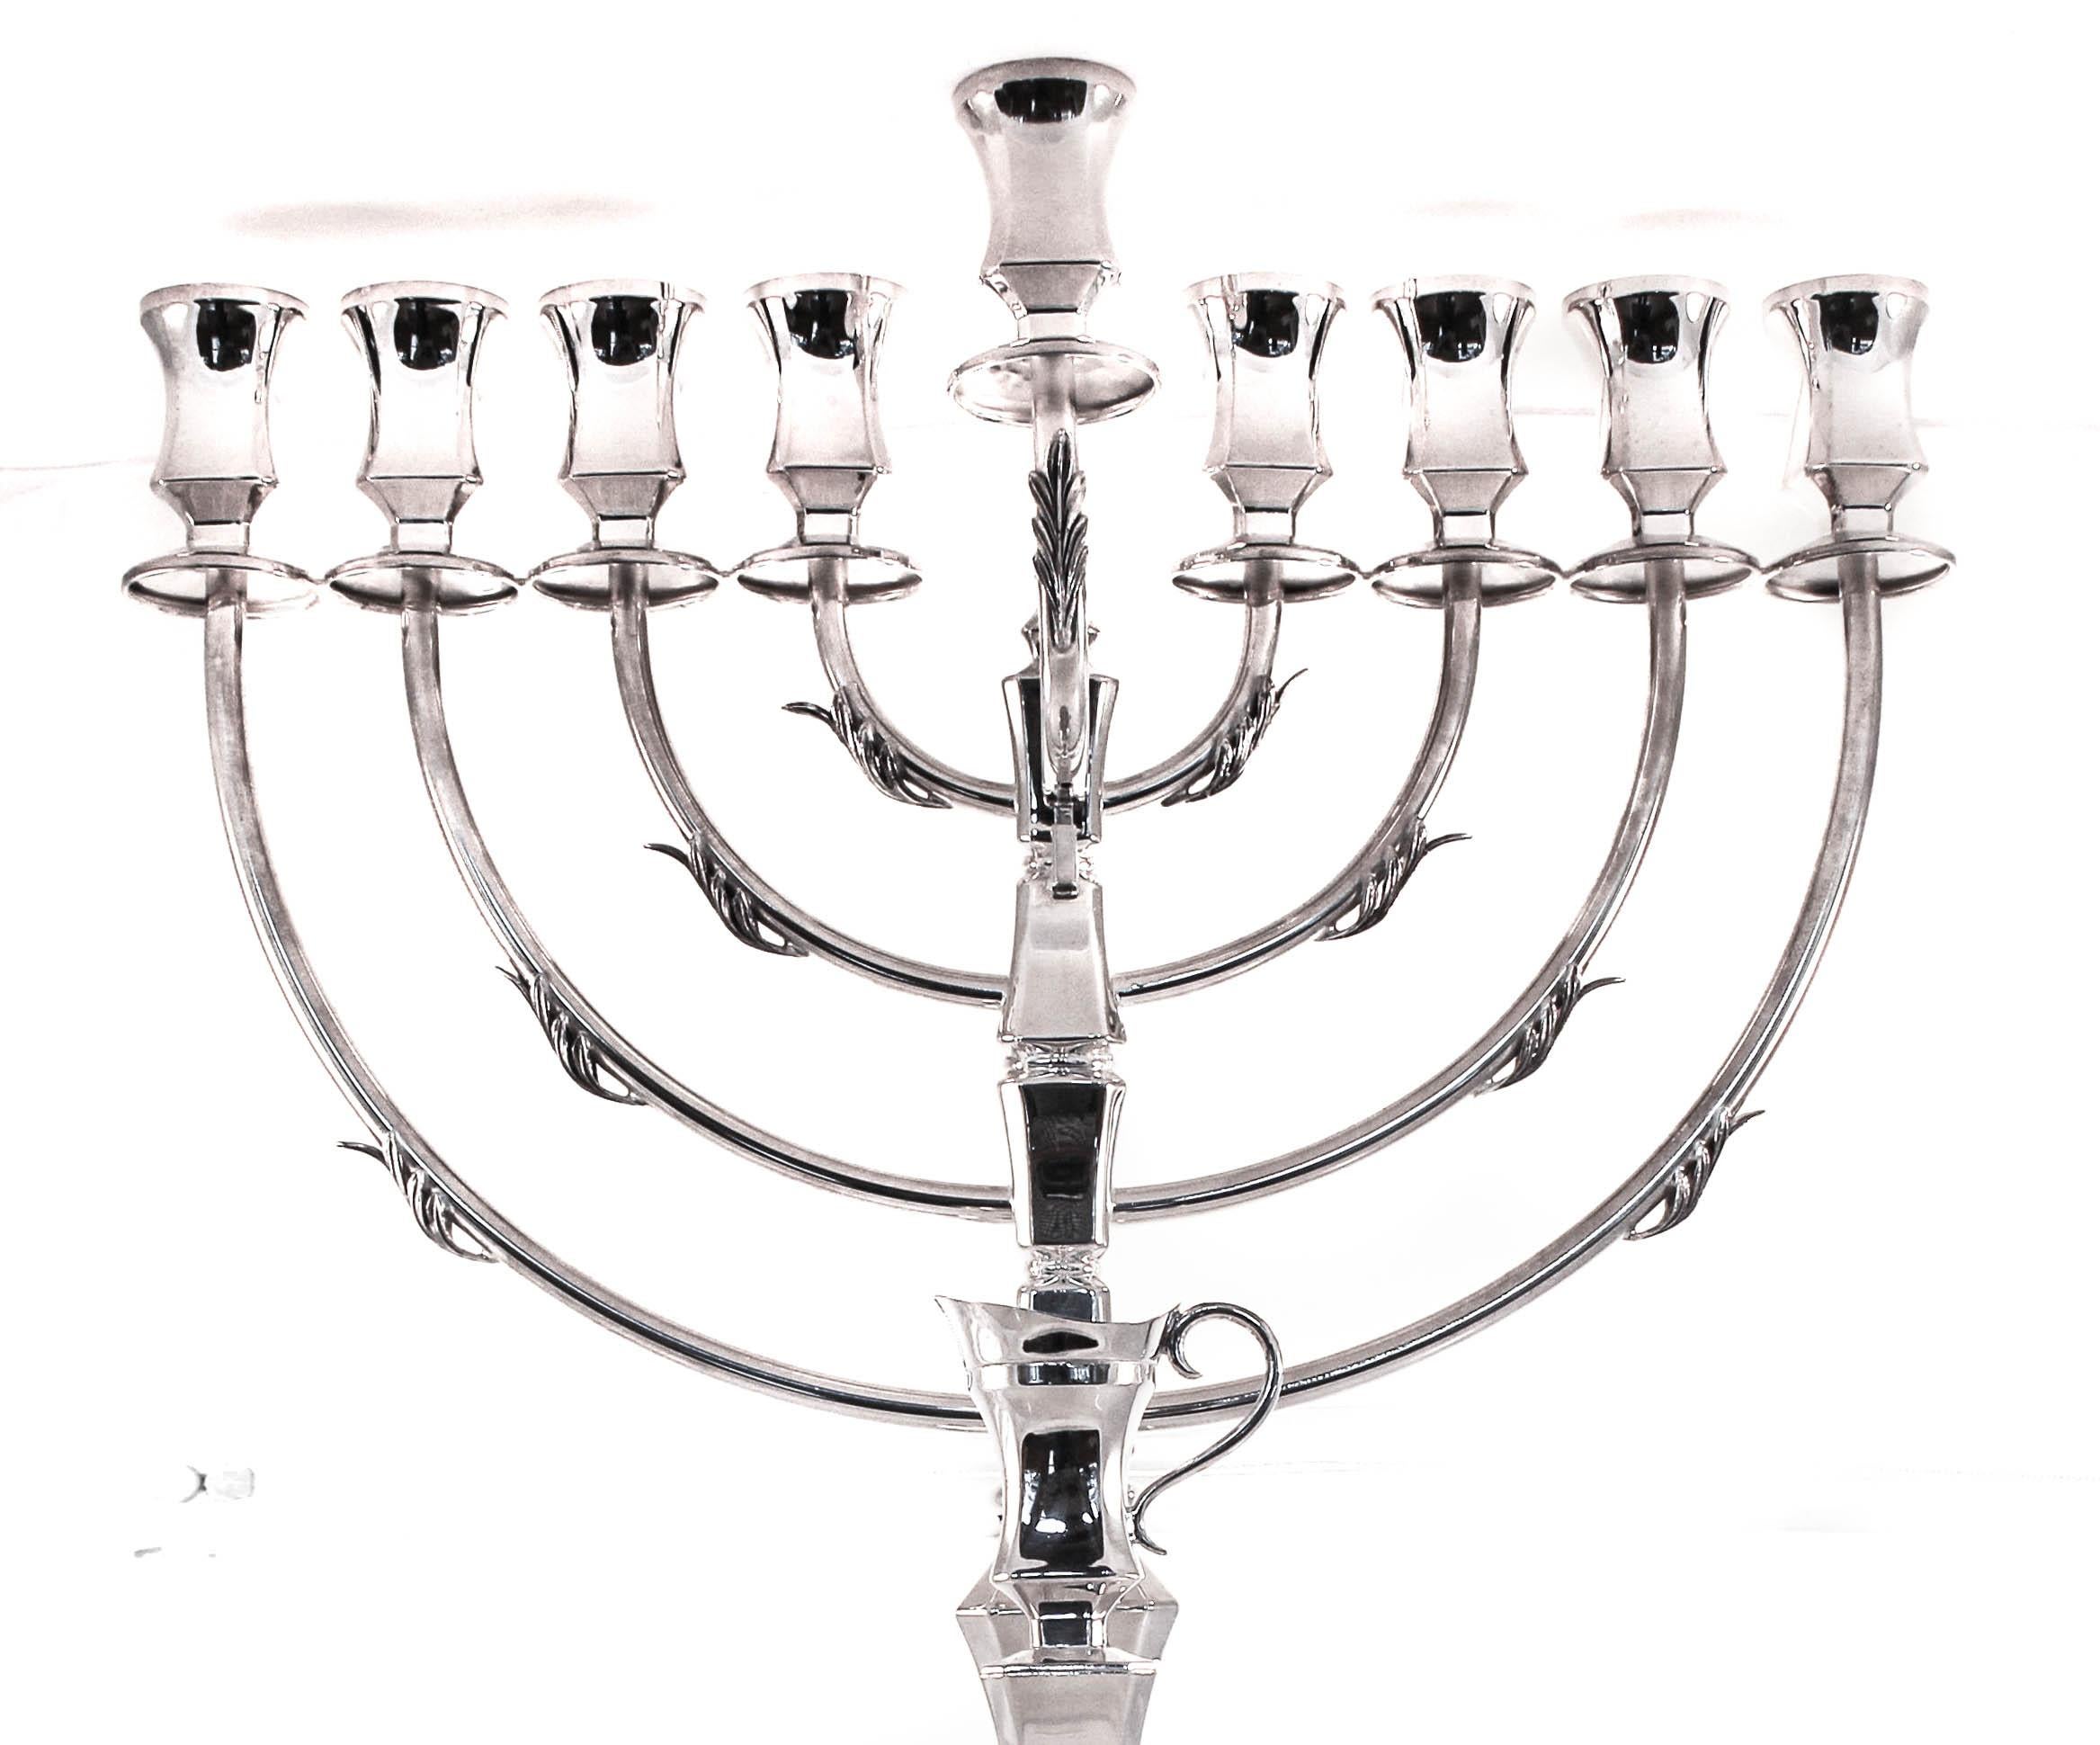 For the person who likes a modern look but with just a little detail, this menorah is sure to please. This sterling silver piece has straight lines and a tailored look but also has some detail on each branch and on the corner let’s. Modern with just